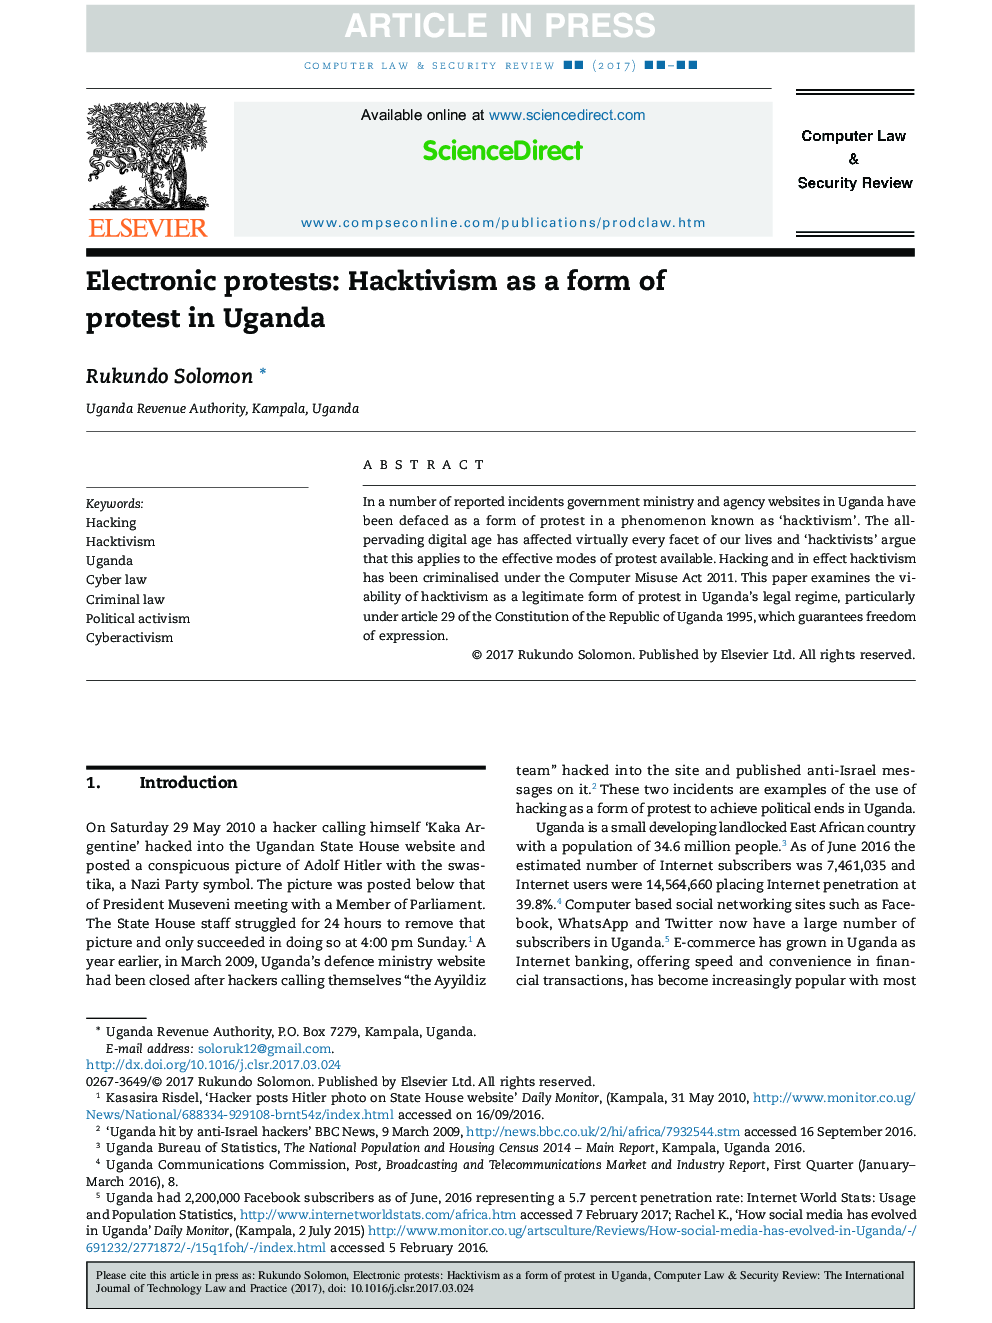 Electronic protests: Hacktivism as a form of protest in Uganda